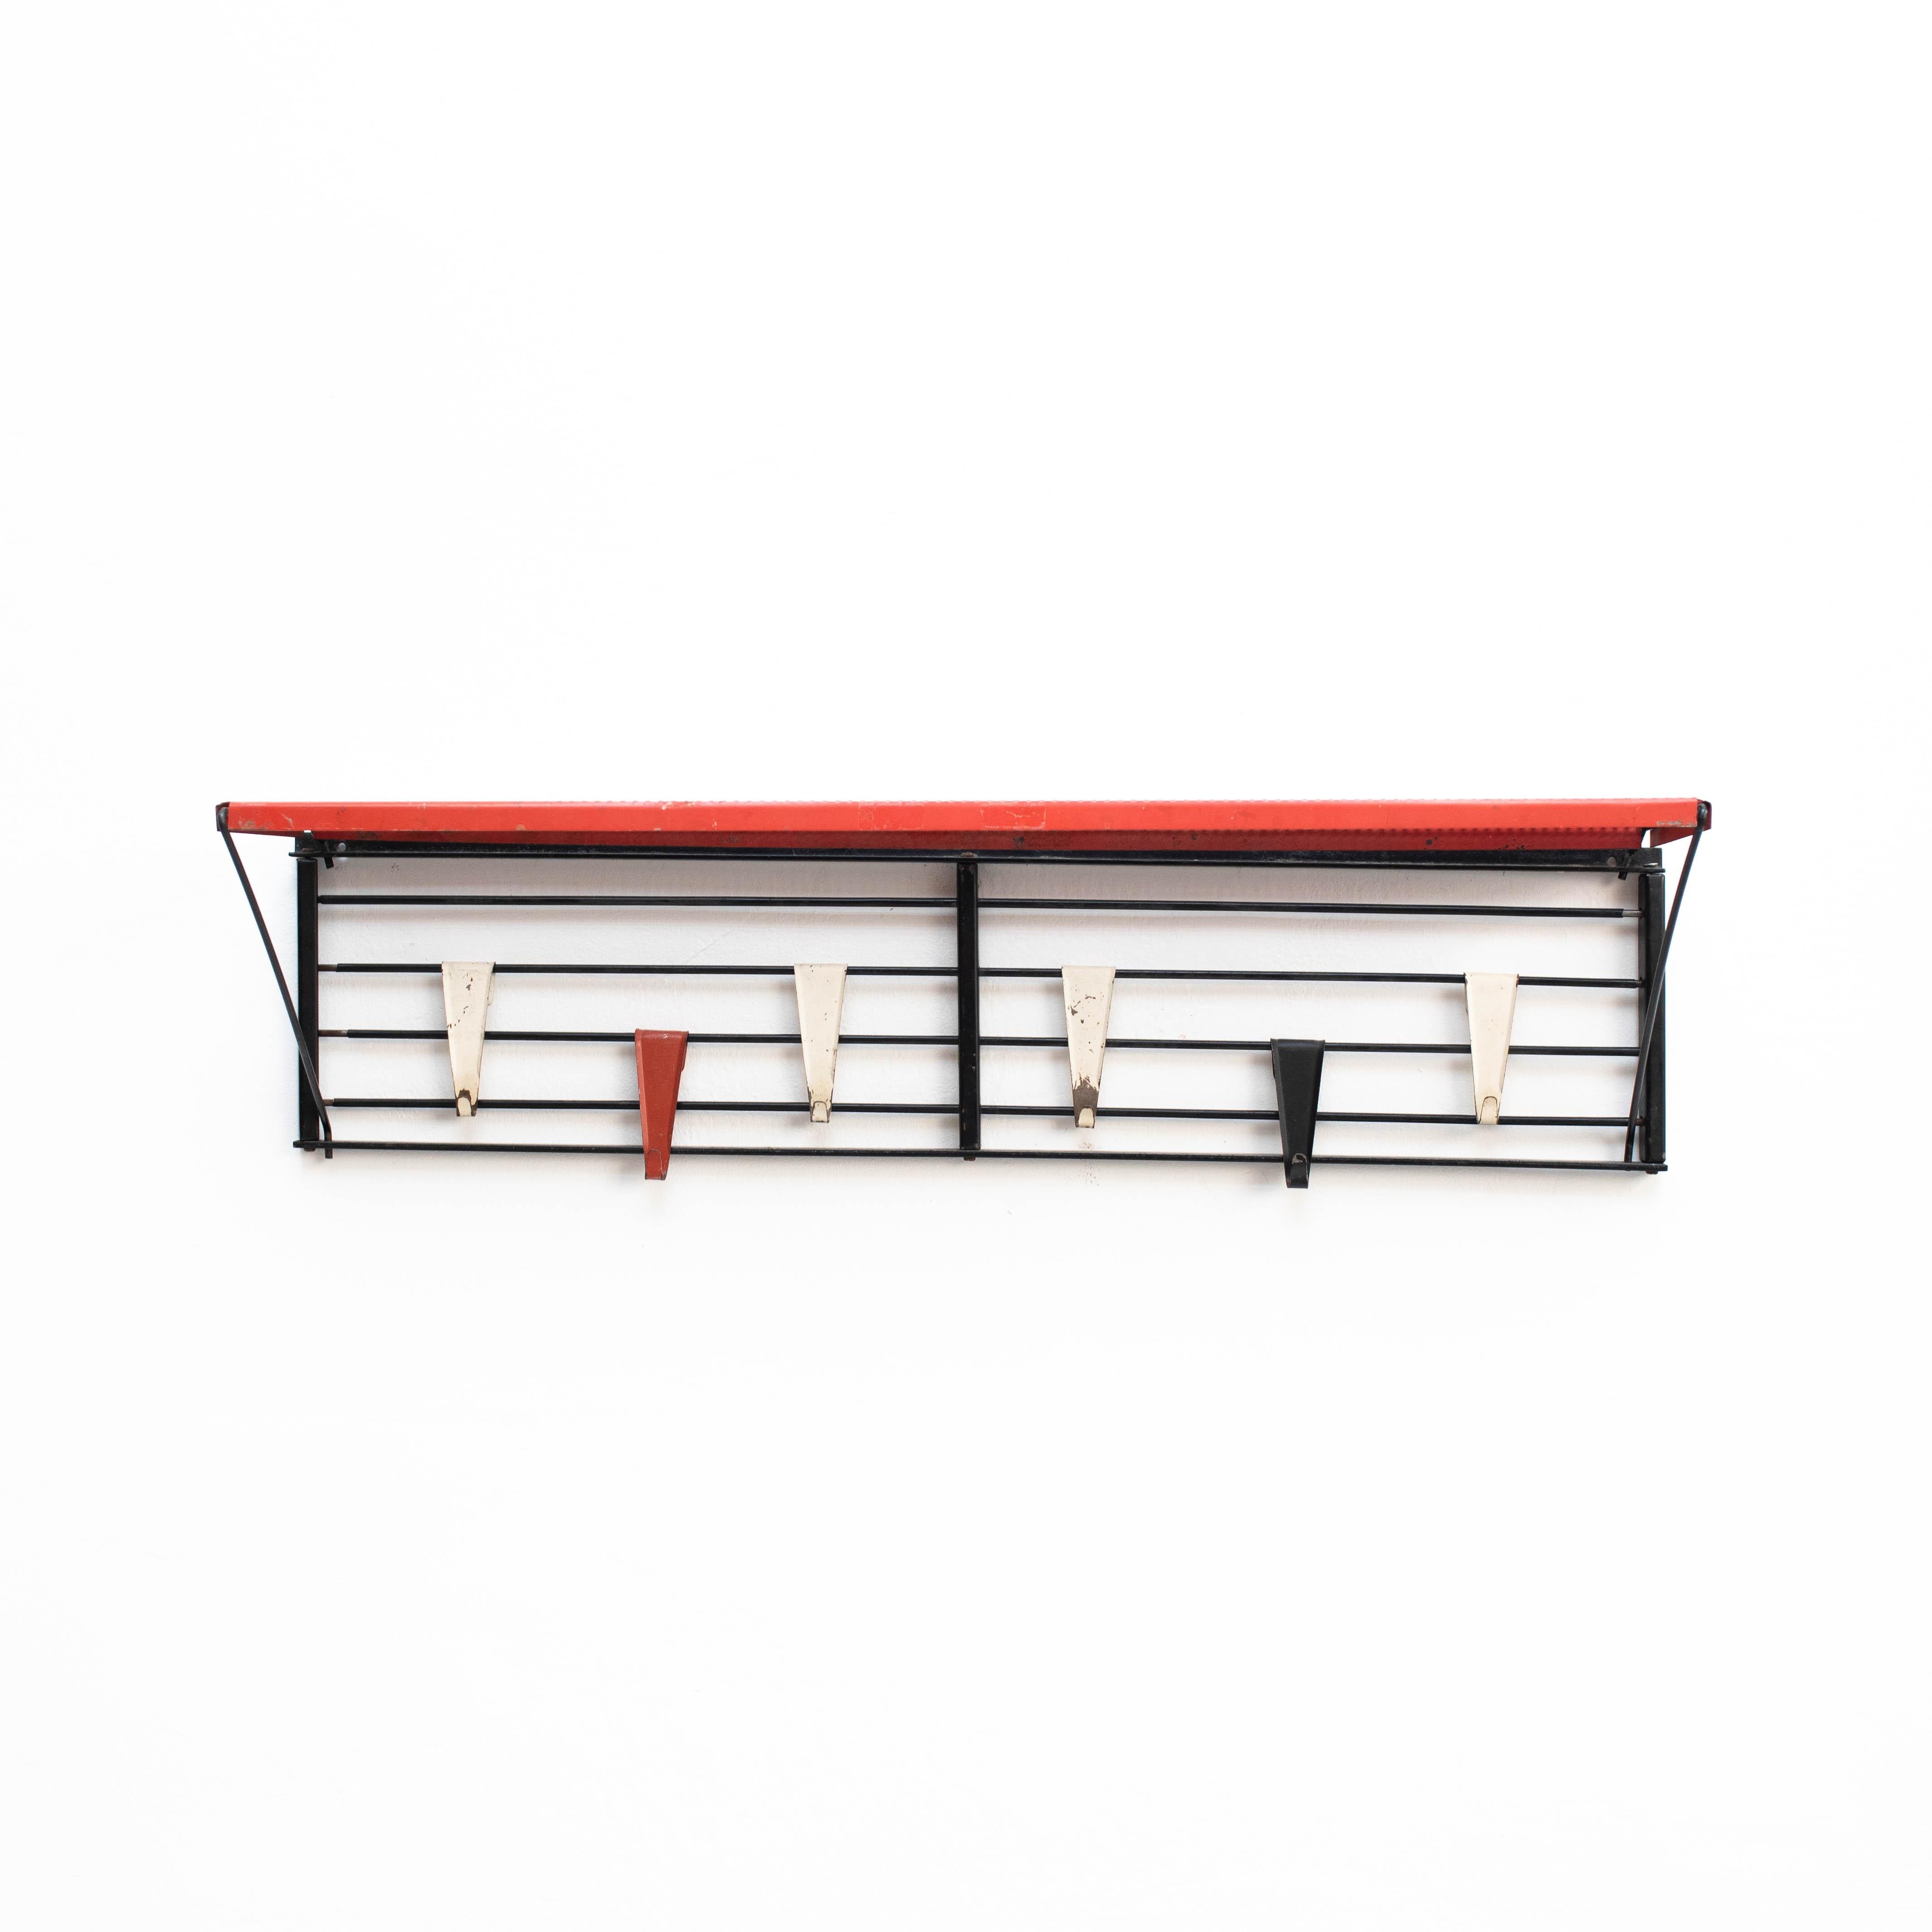 Metal shelving designed by Tjerk Reijenga and manufactured by Pilastro.
Holland 1950.

In original condition, with minor wear consistent with age and use, preserving a beautiful patina.

Materials:
Metal 

Dimensions:
H 23cm 
W 88cm
D